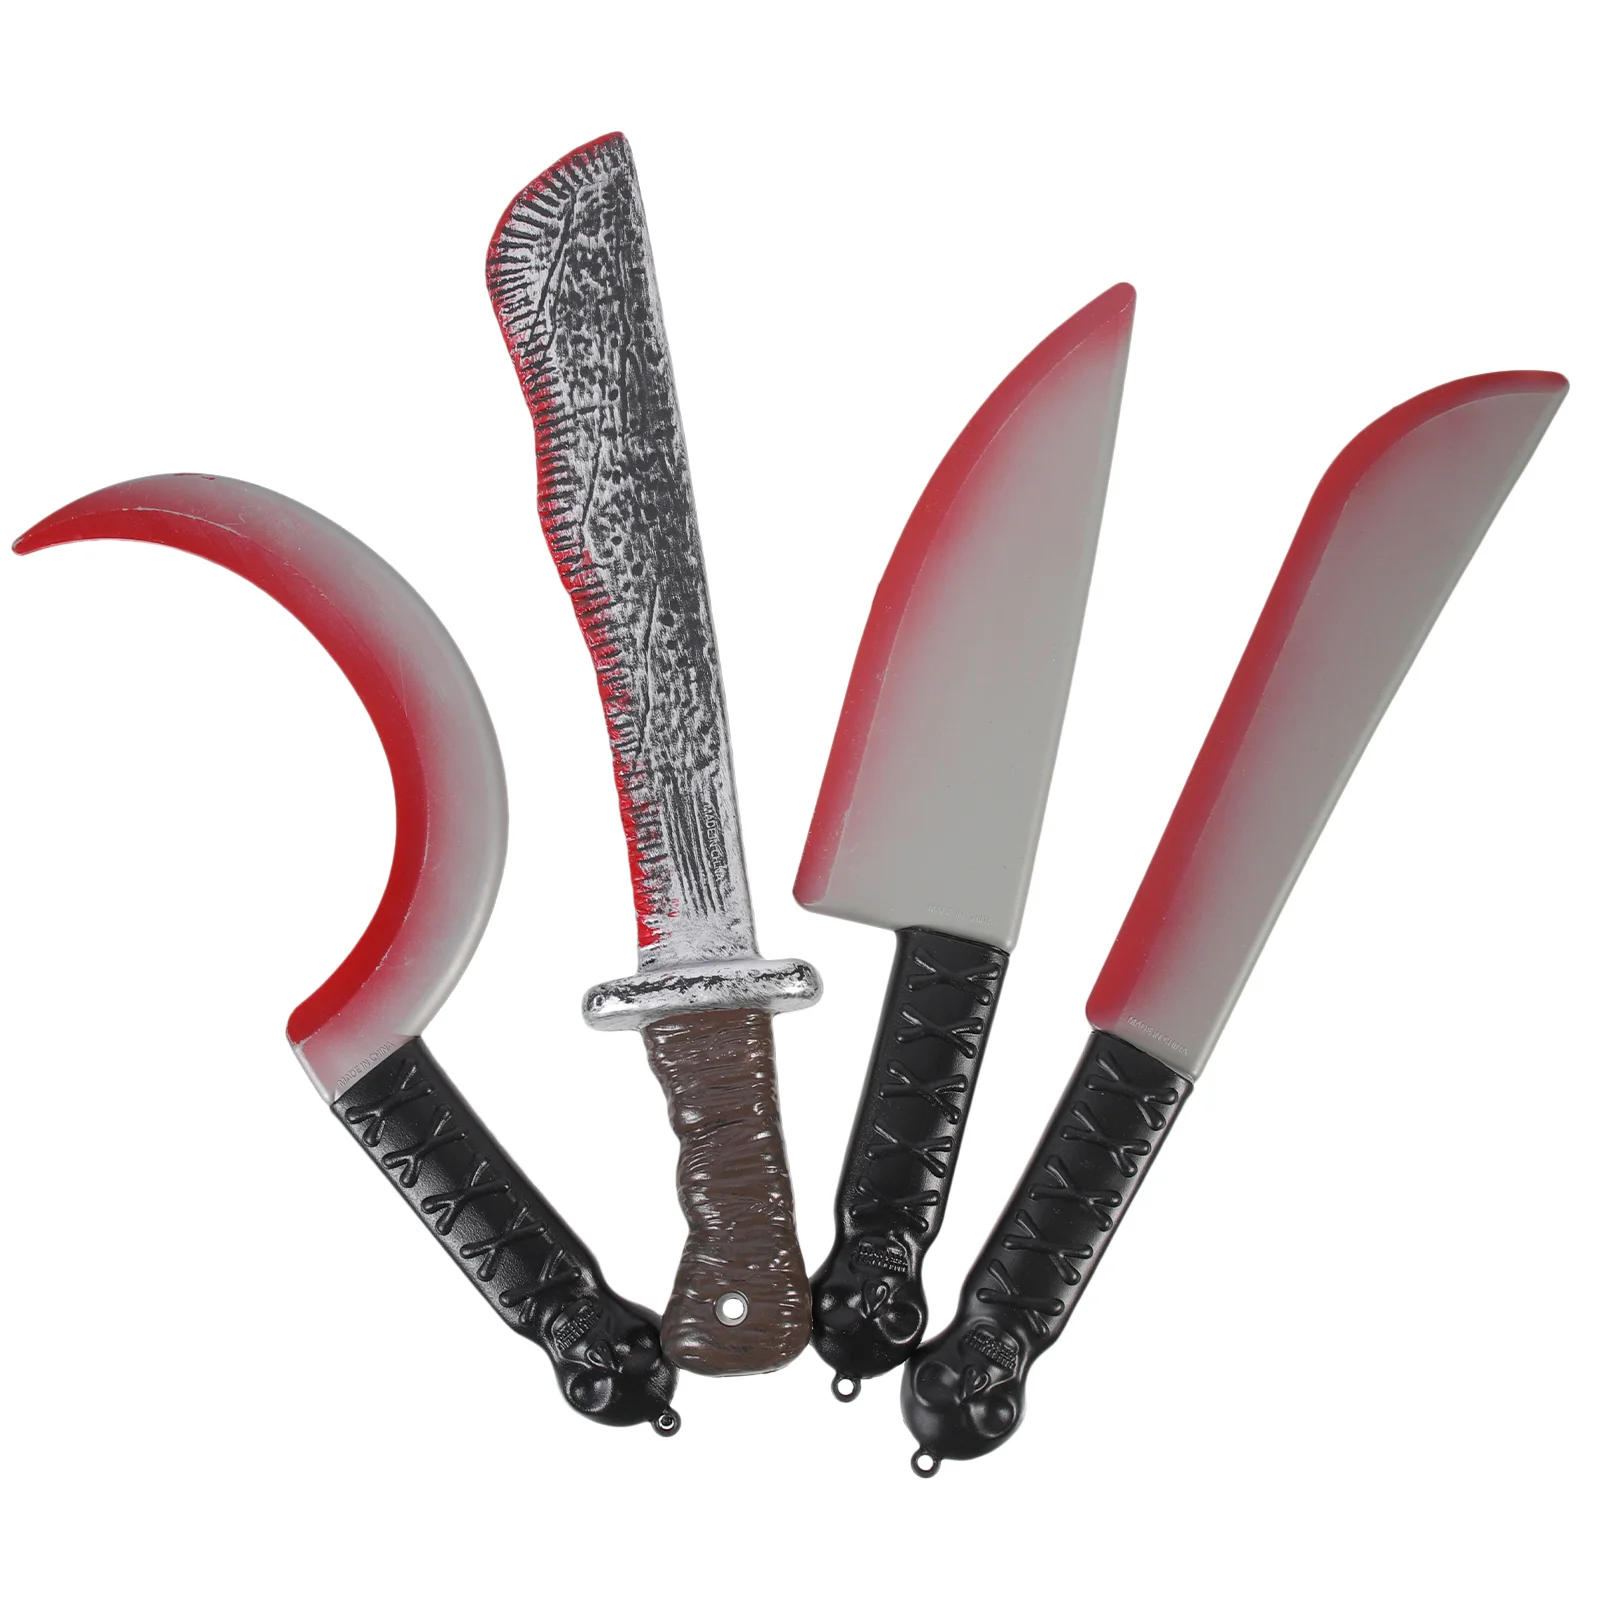 

4 Pcs Blood Knife Props Fake Knives Party Supplies Vintage Toys Cosplay Halloween Machete Simulated Prank